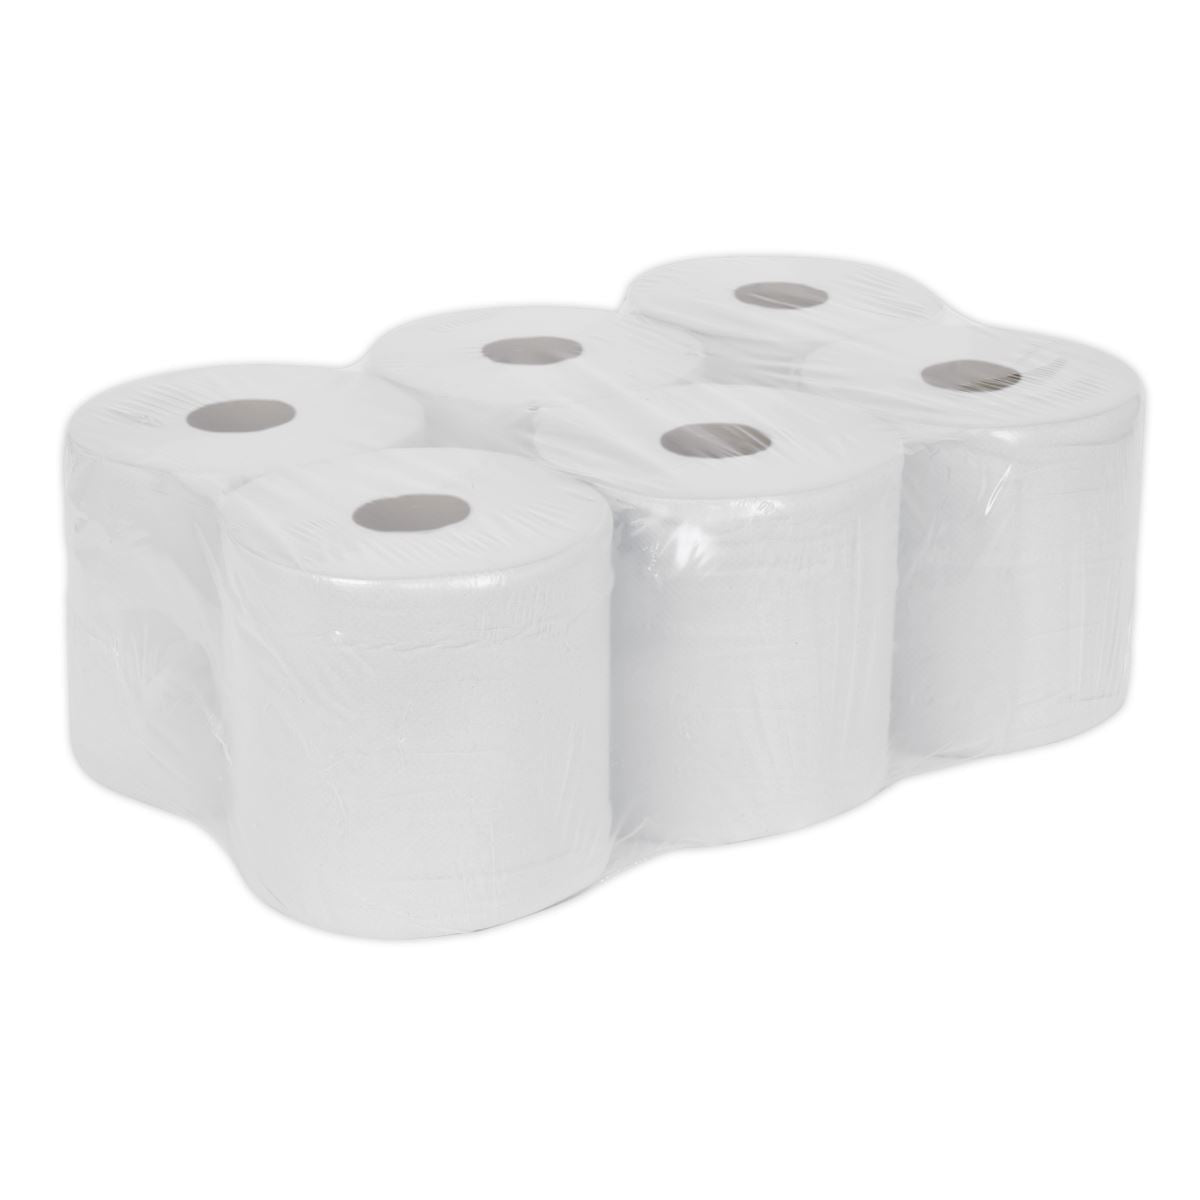 Sealey Paper Roll White 2-Ply Embossed 150m Pack of 6